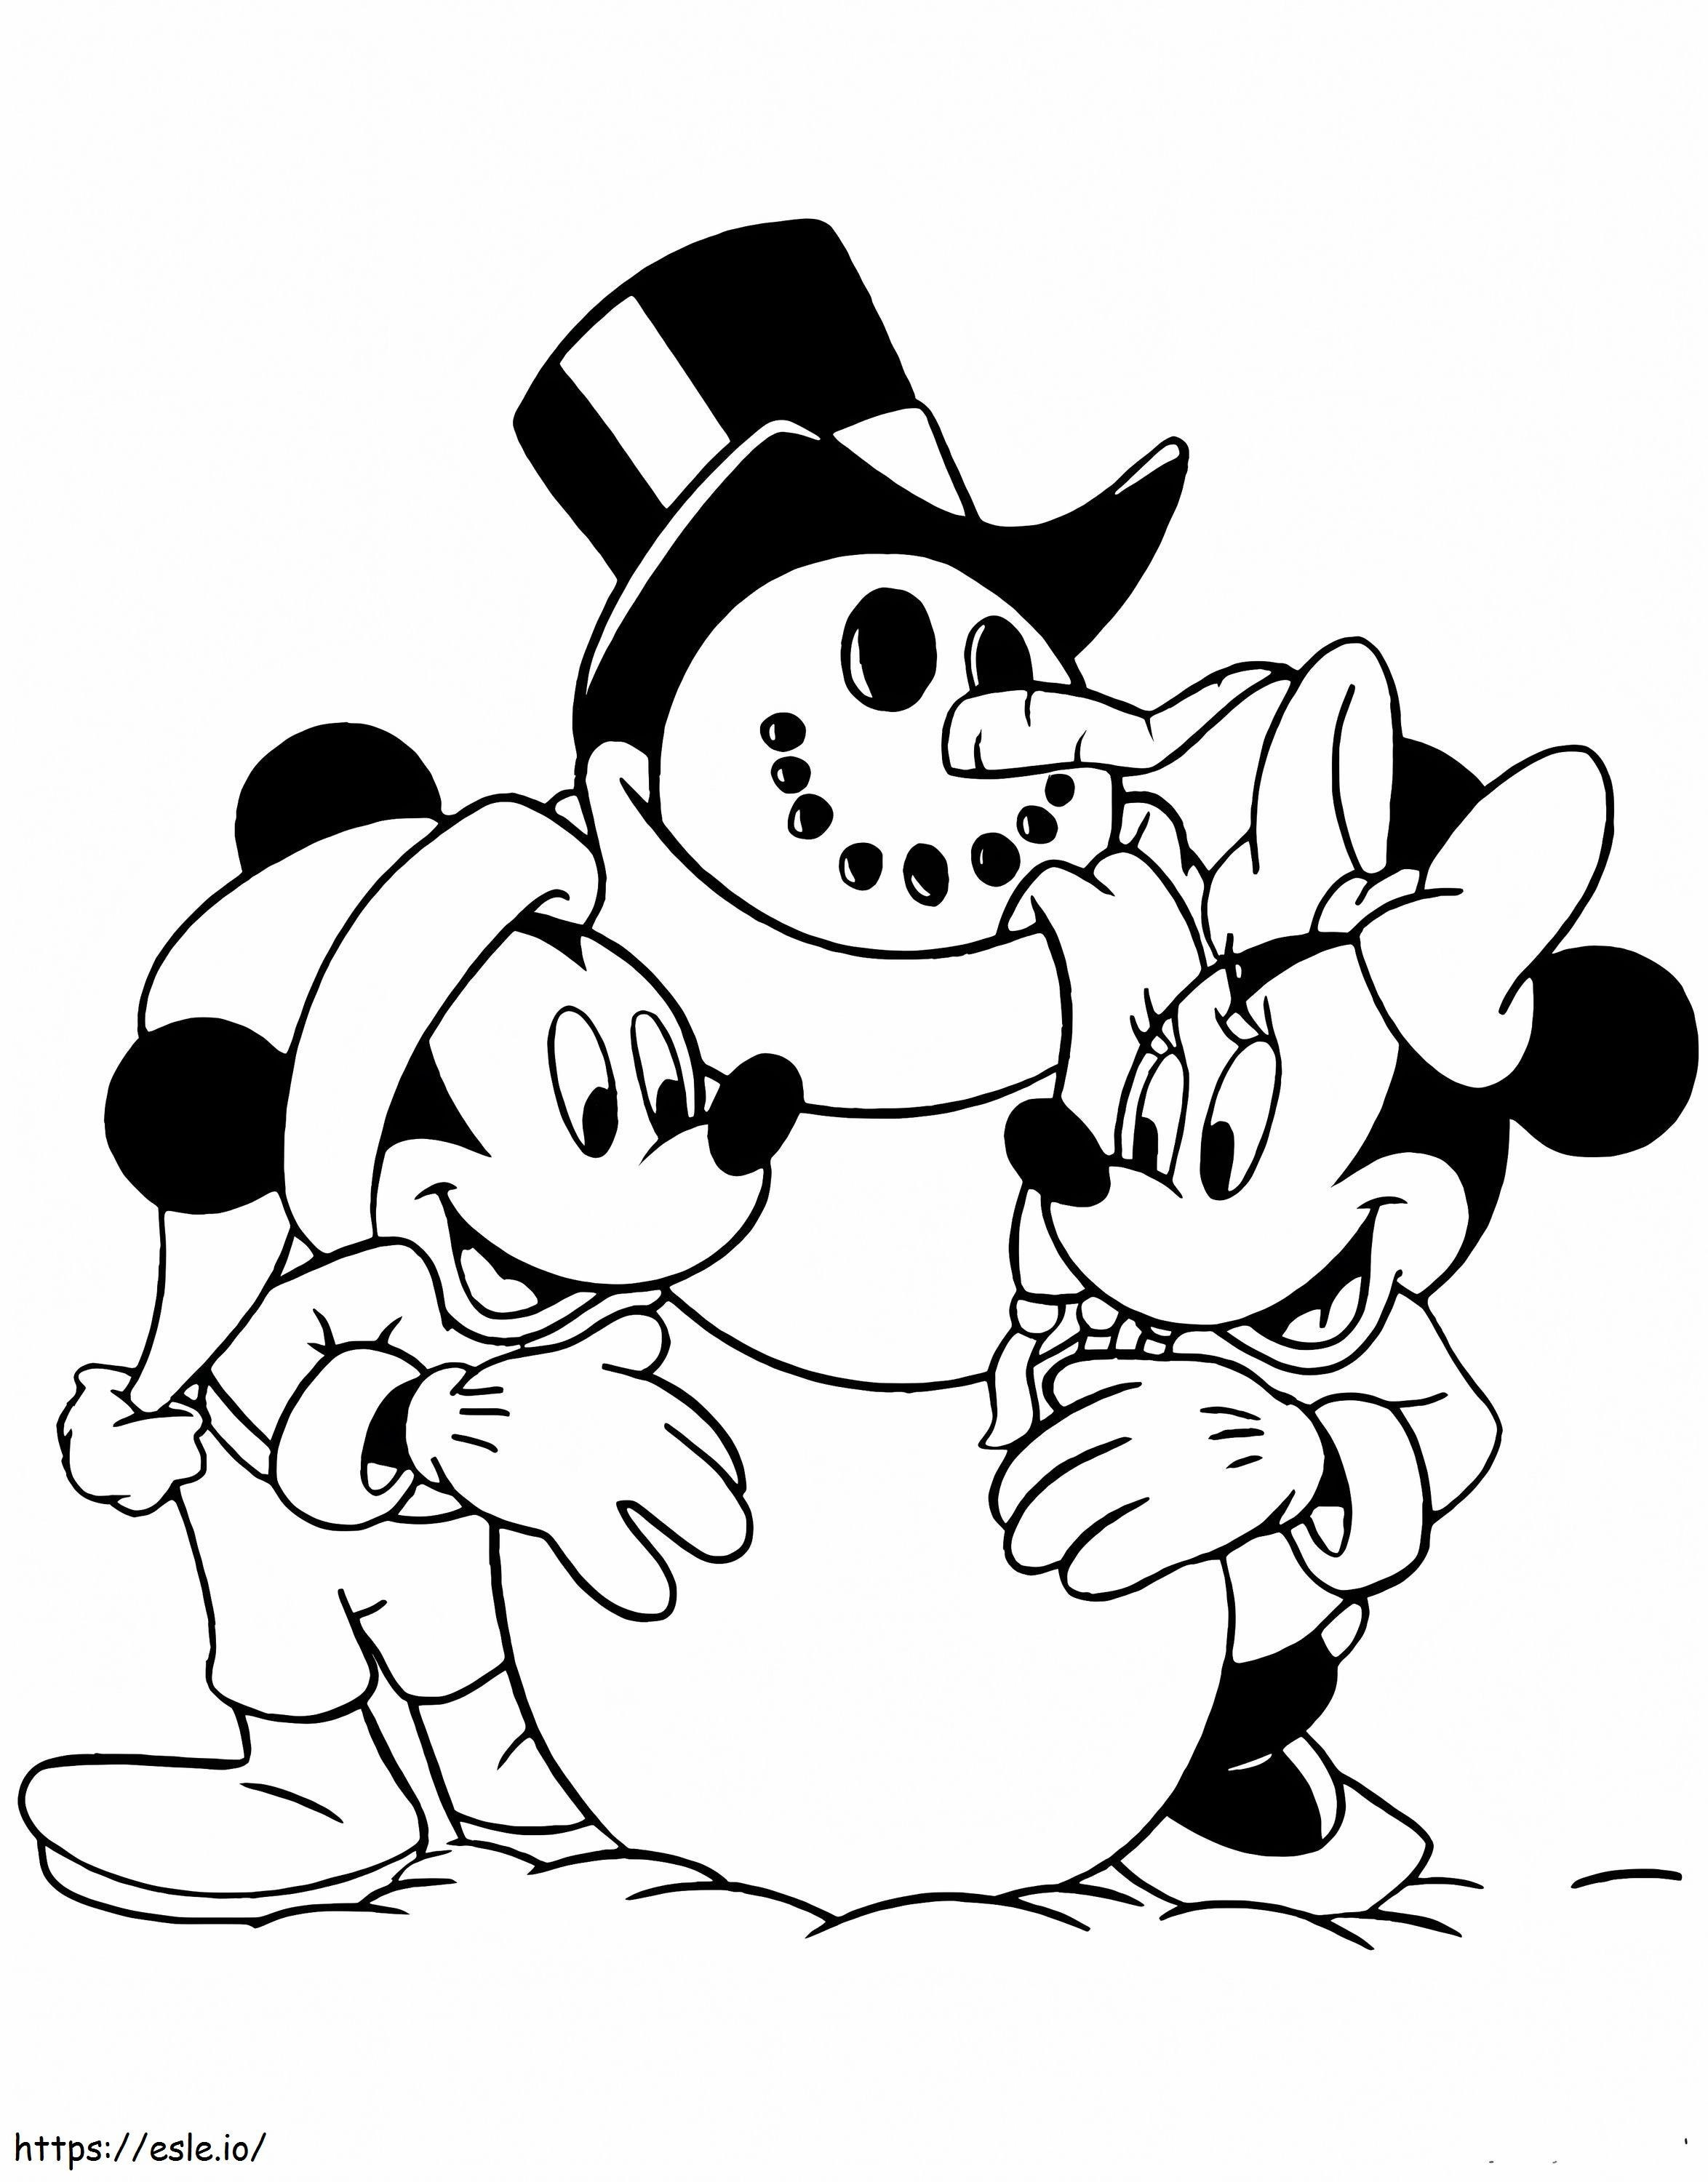 Snowman With Mickey And Minnies coloring page